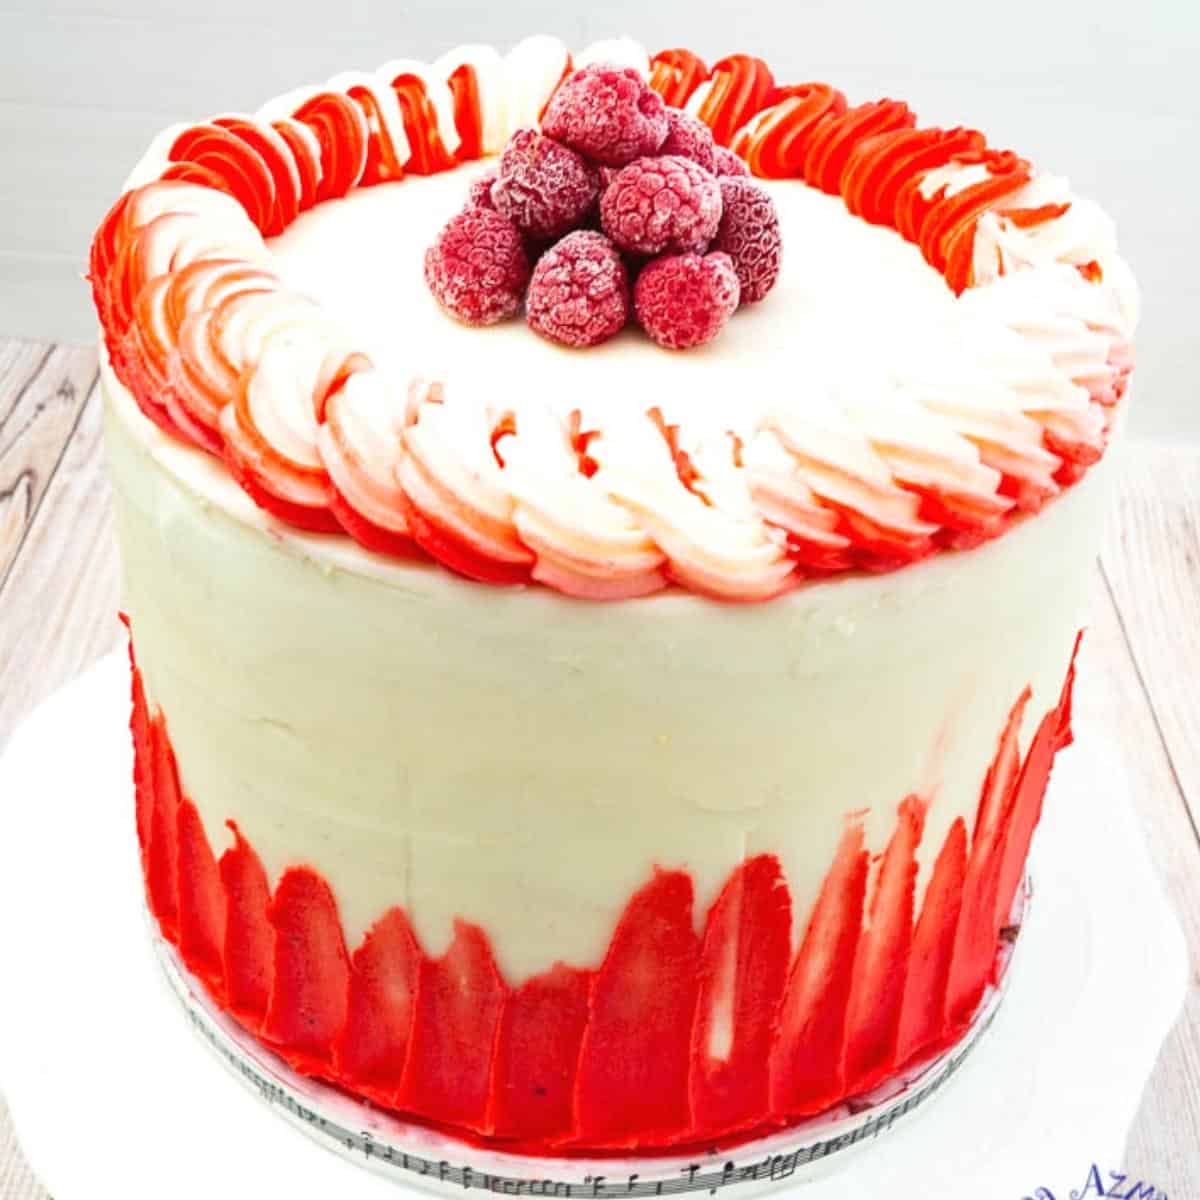 A respberry cake frosted with white chocolate buttercream.